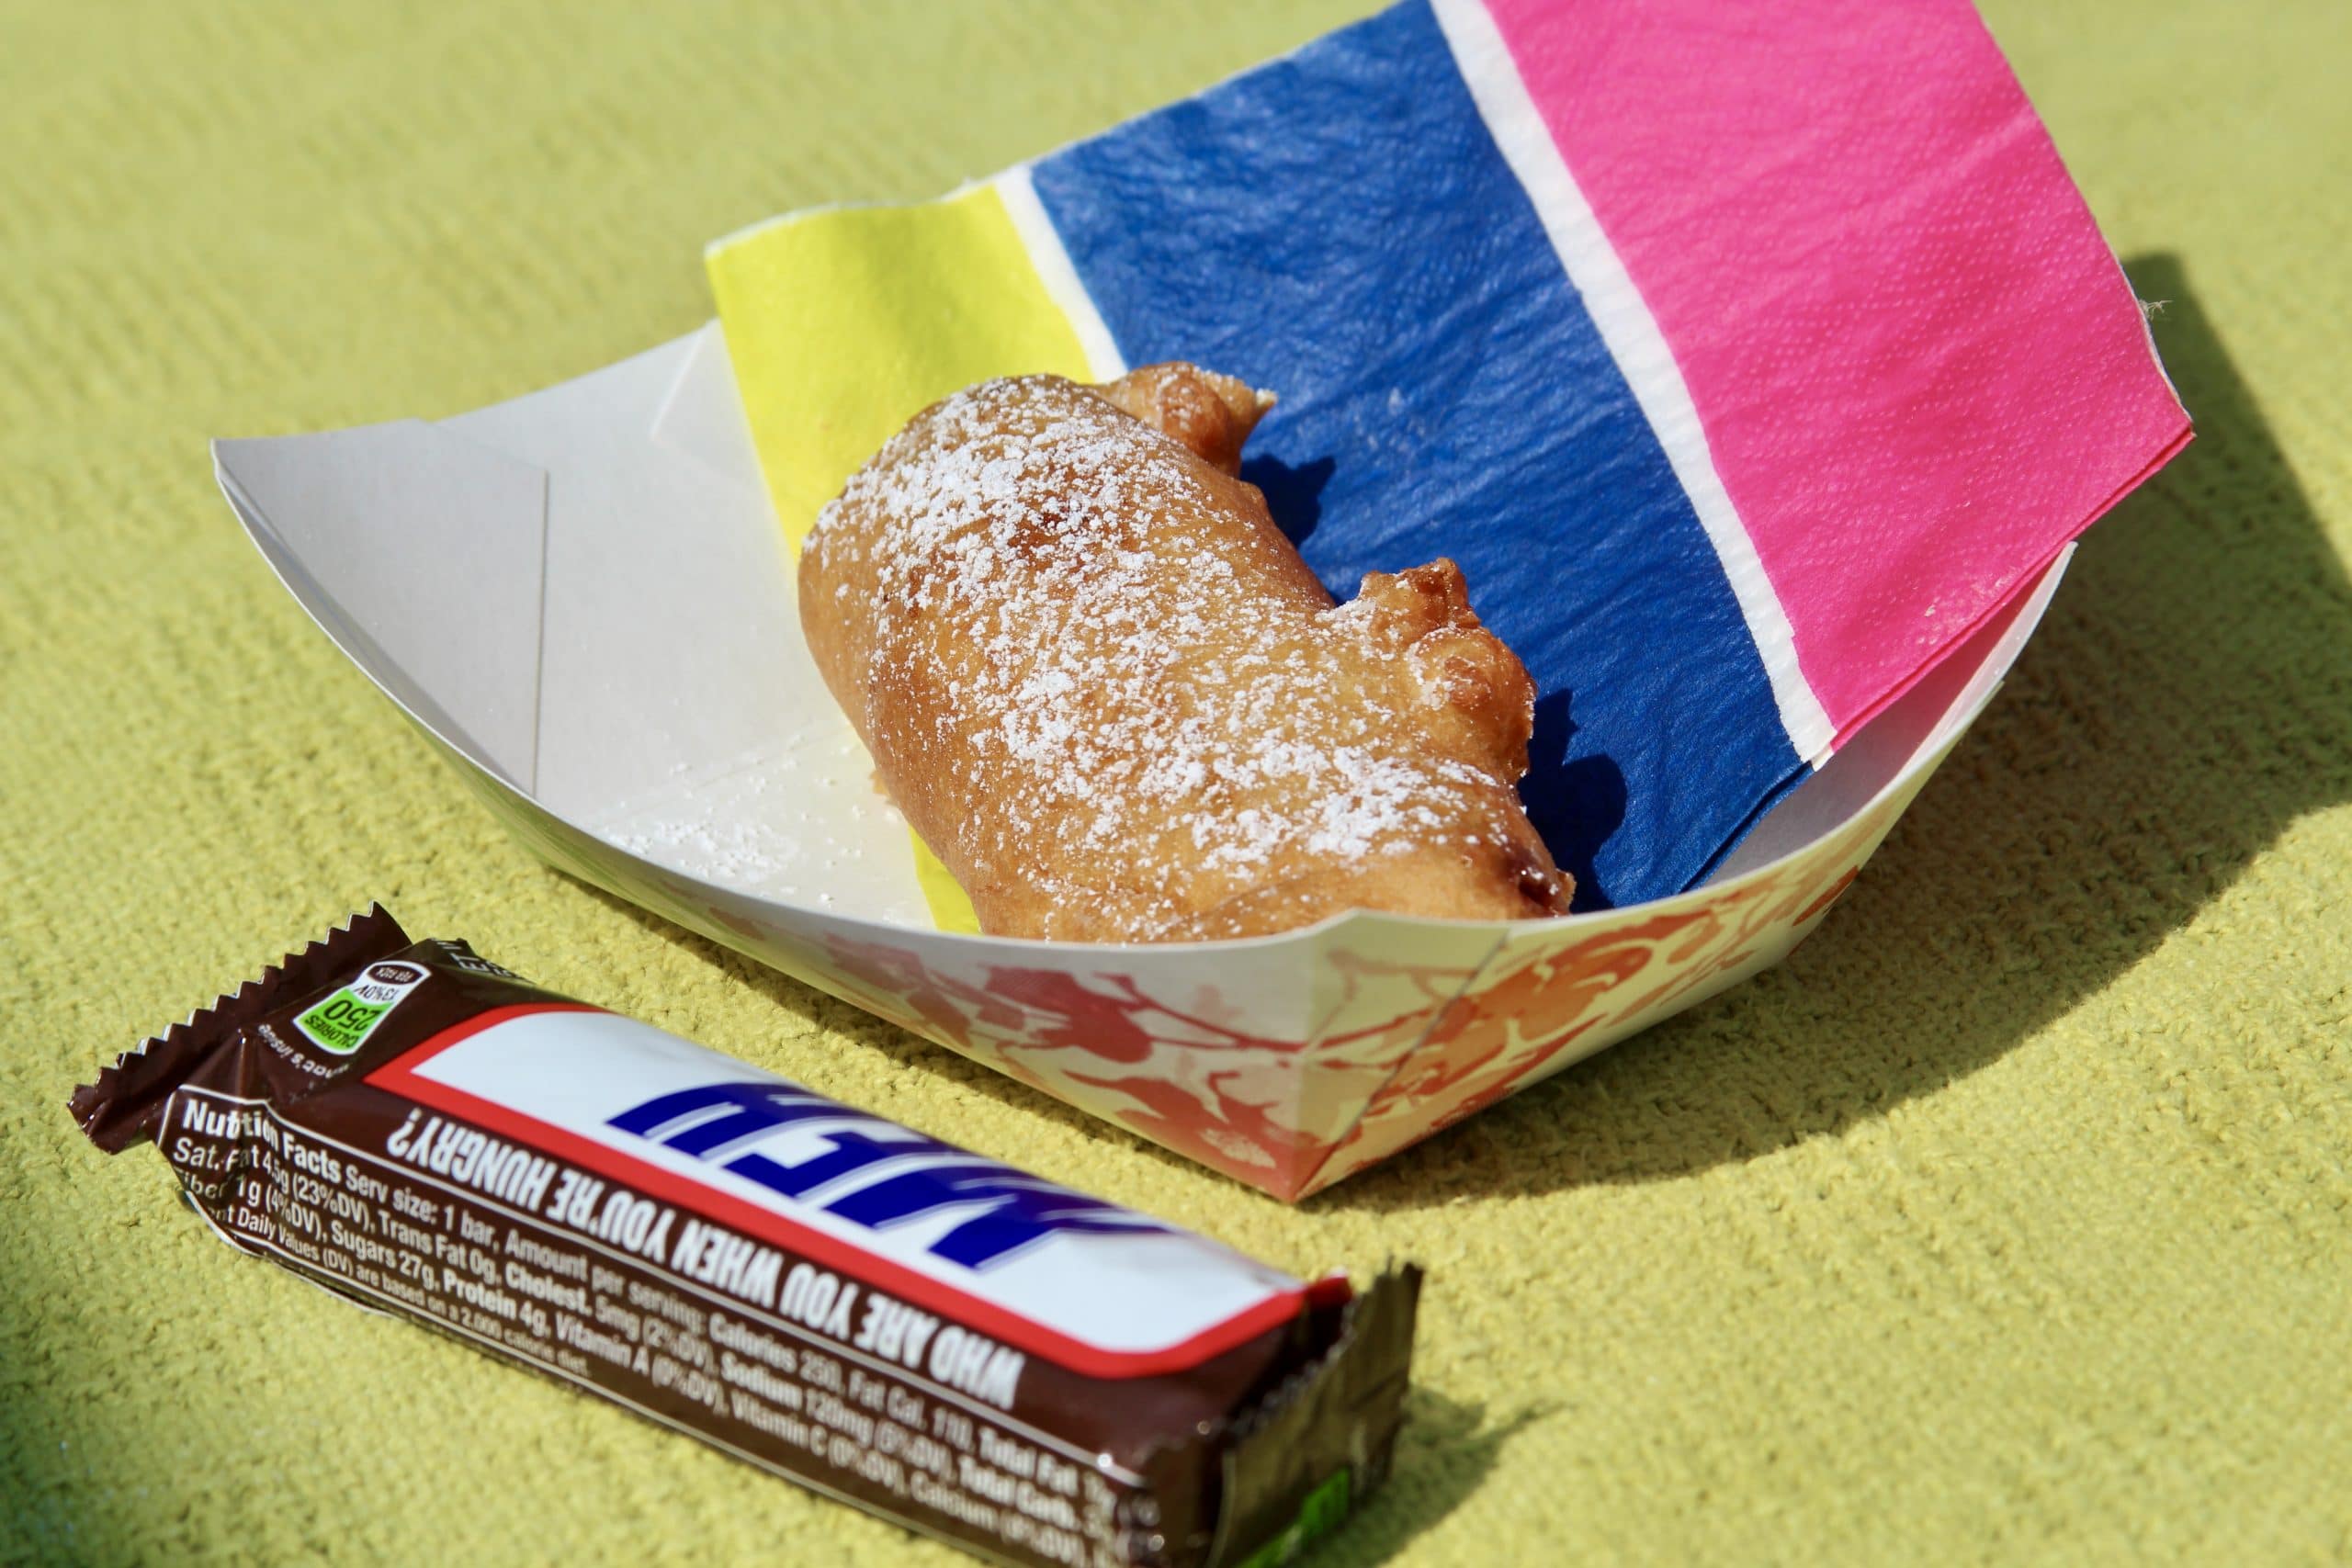 Deep fried snickers